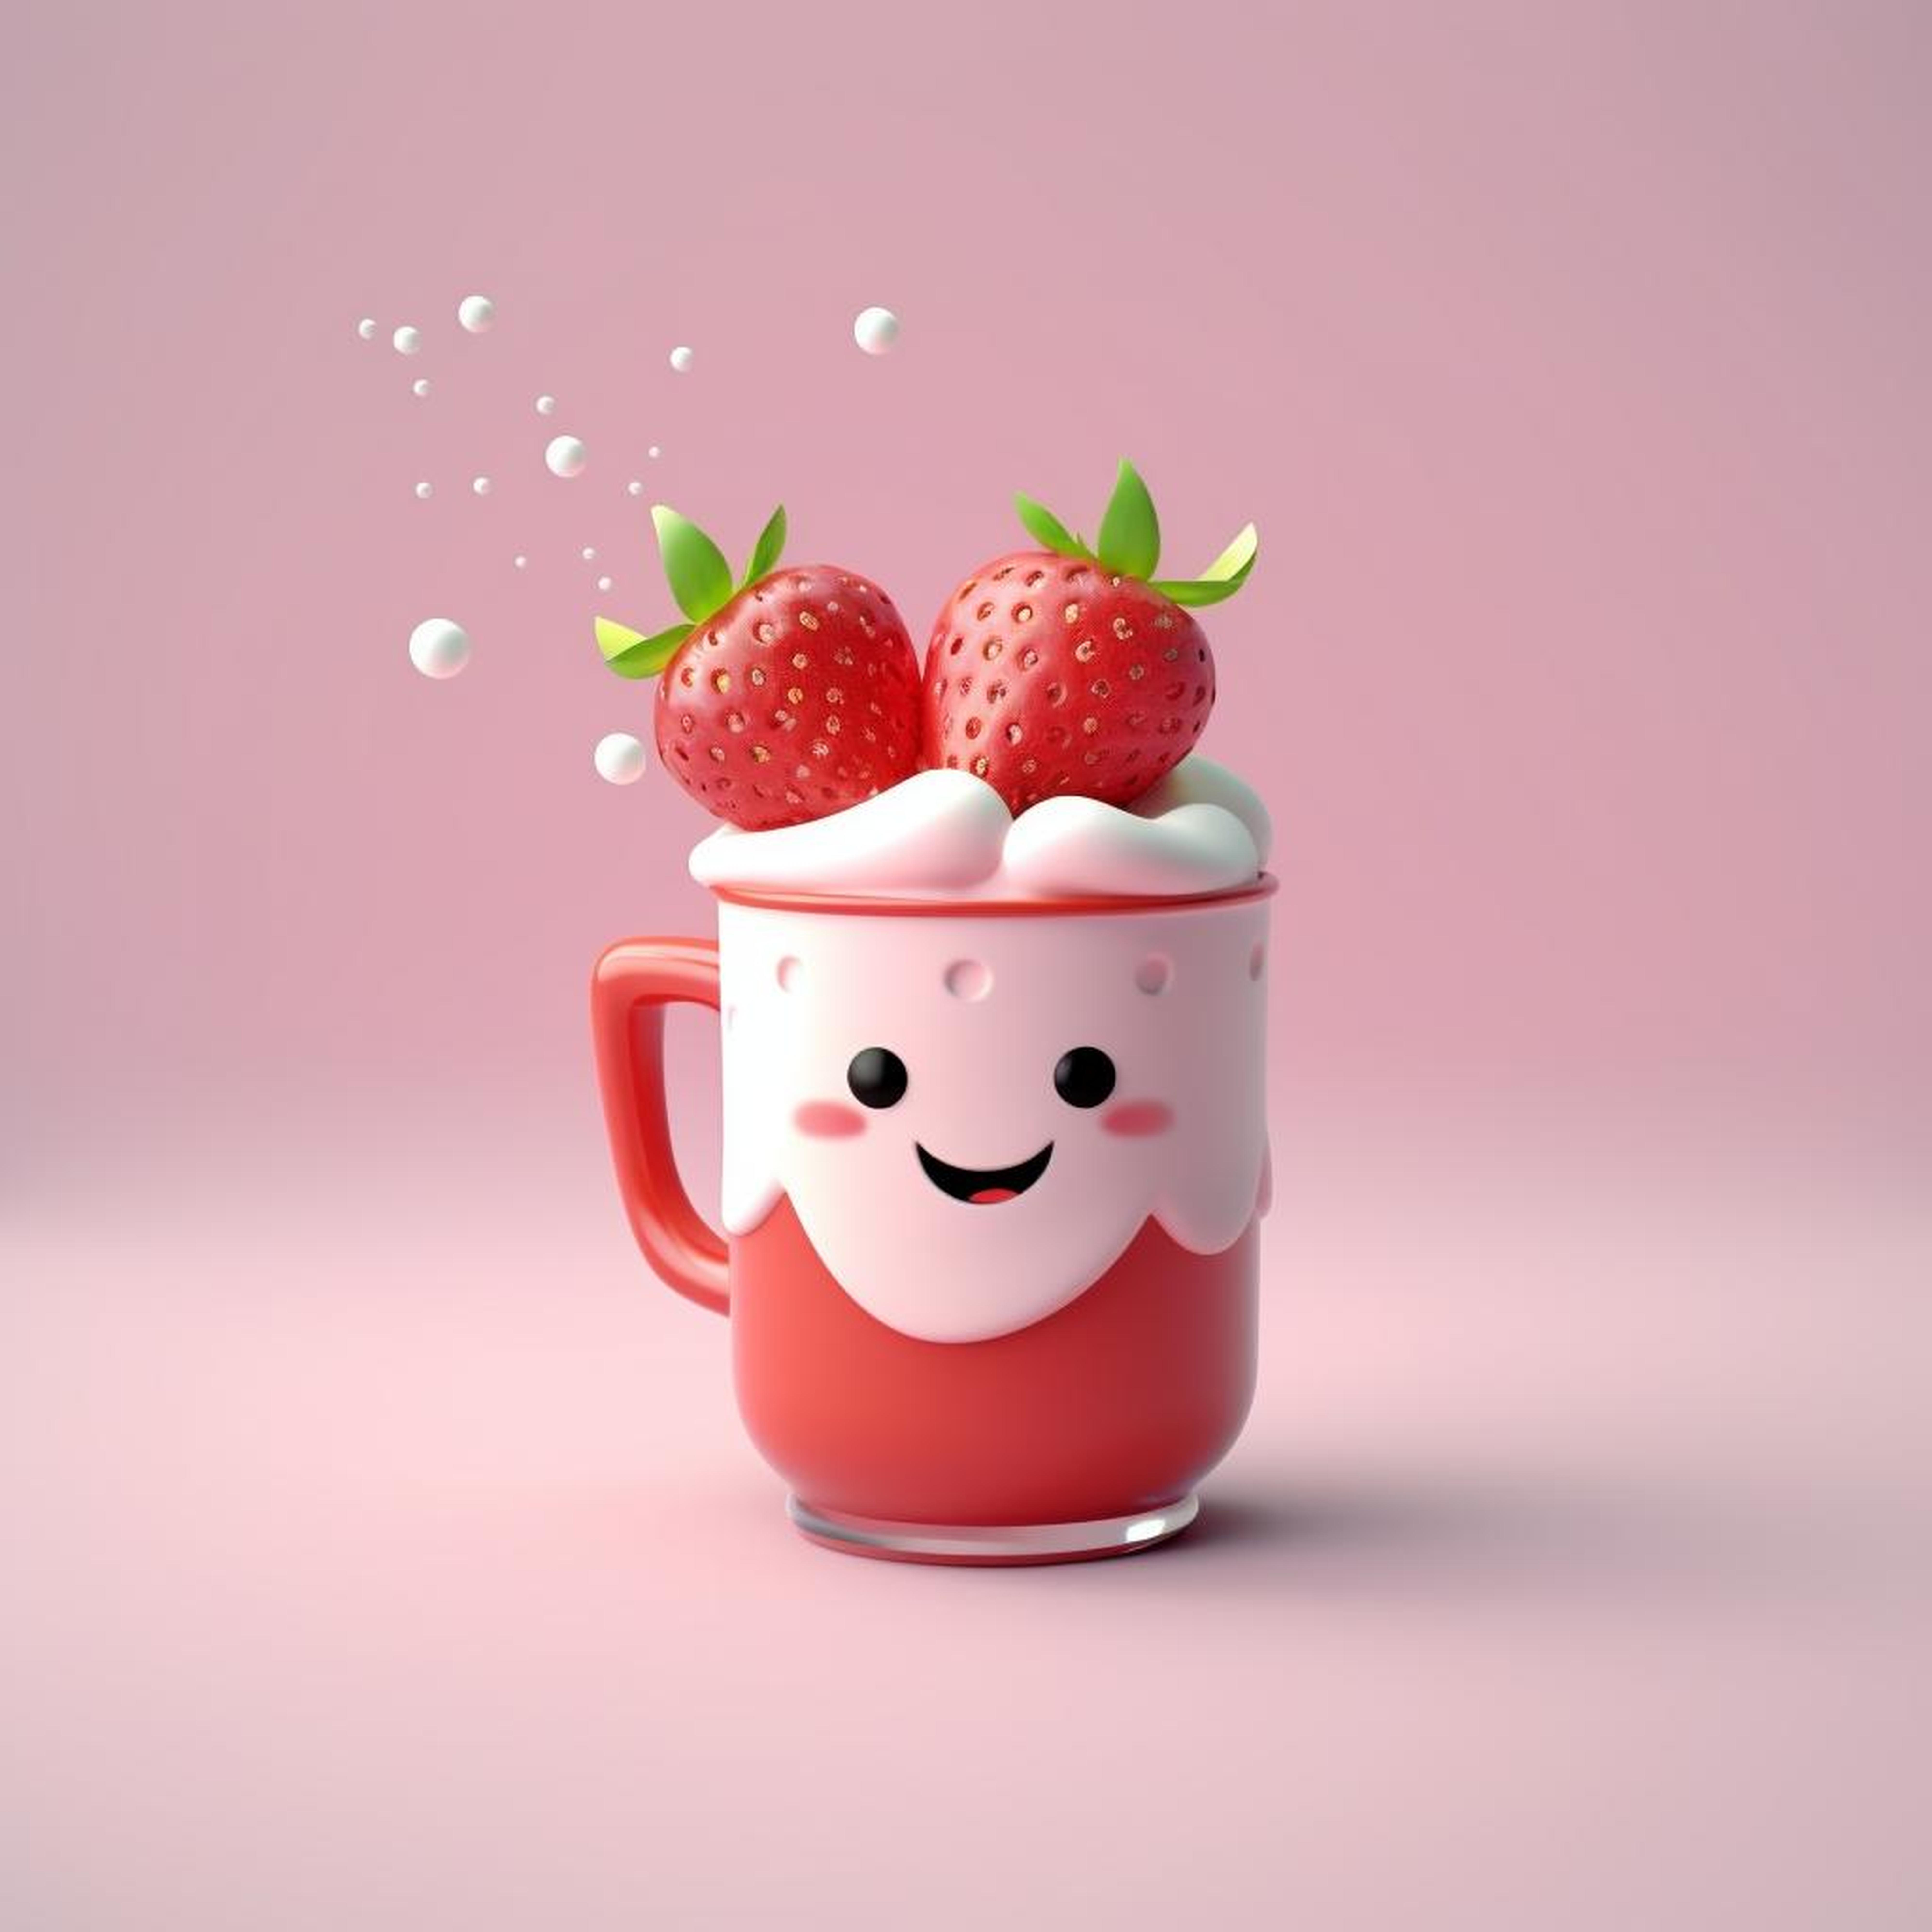 Cartoon graphic of a happy yogurt cup with a spoon on a yogurt-themed background.